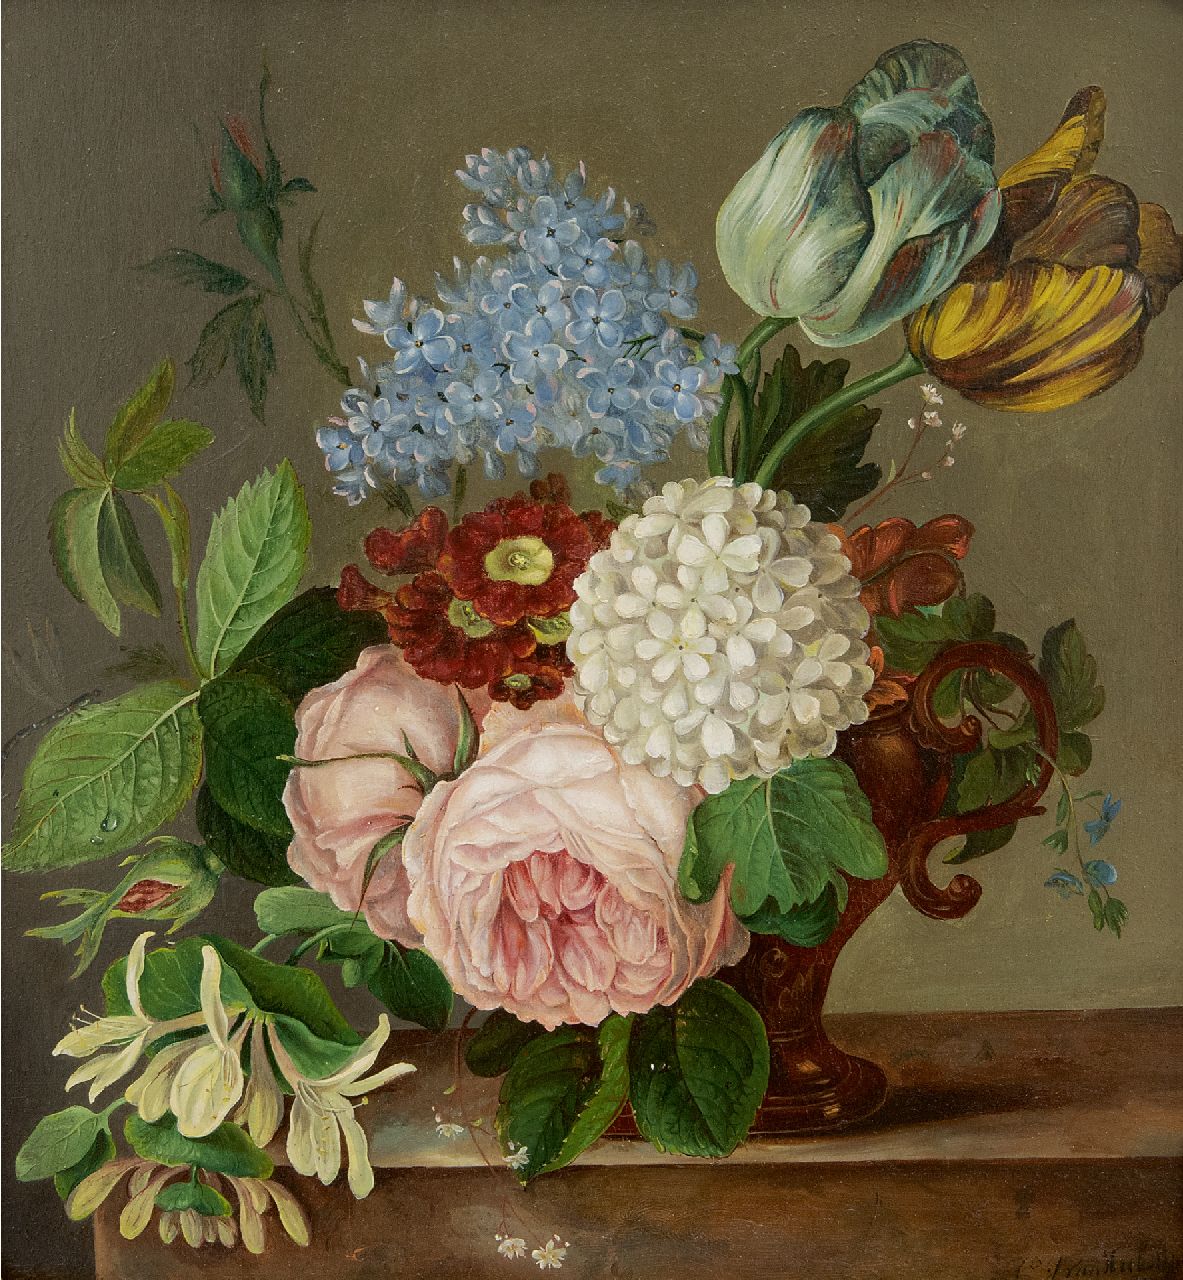 Johan van Hulstijn | A still life with roses, tulips, primula and other flowers, oil on panel, 29.3 x 26.9 cm, signed l.r.